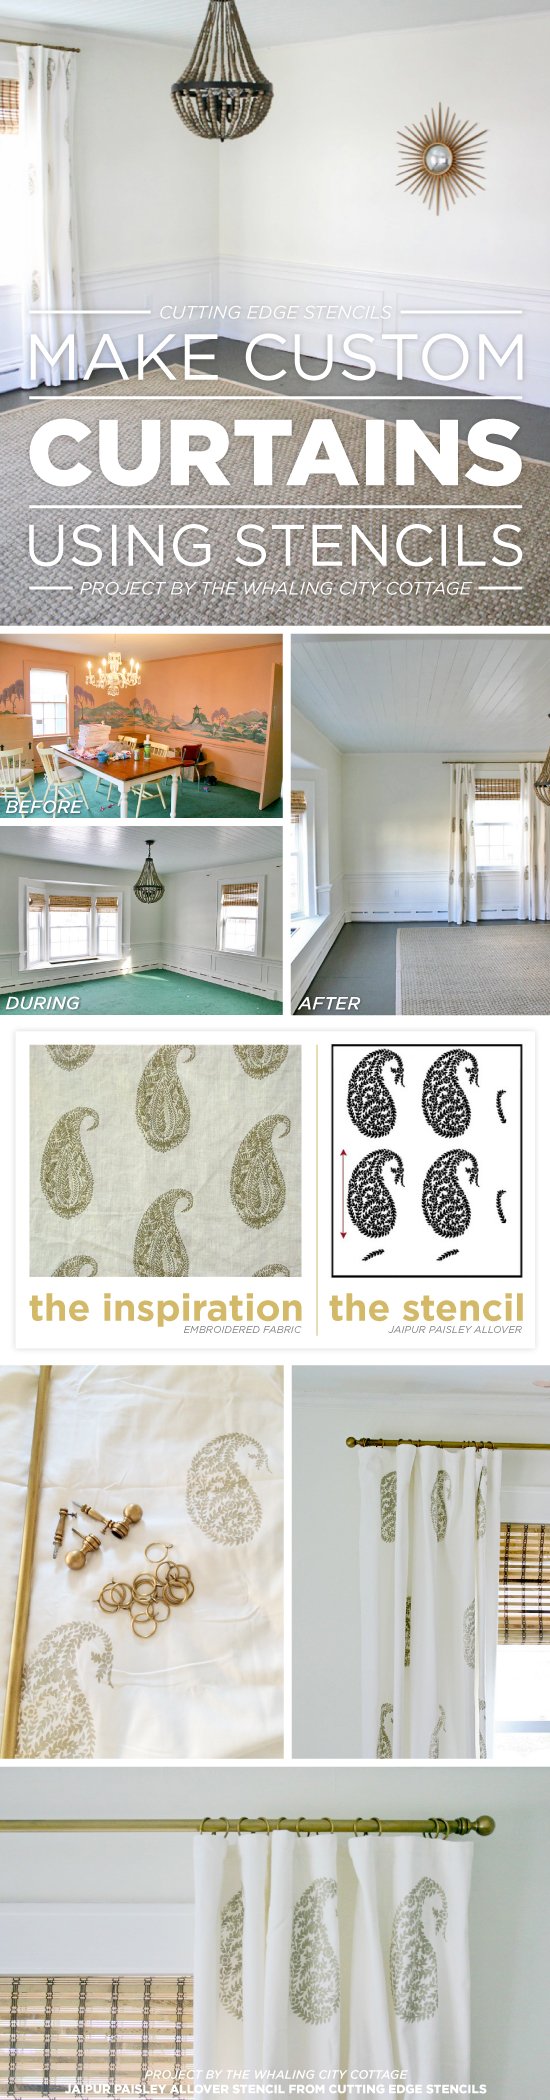 Cutting Edge Stencils shares how to add stenciled pattern to plain Ikea curtains using the Jaipur Paisley Stencil. http://www.cuttingedgestencils.com/indian-paisley-stencil-wall-stencils-pattern.html